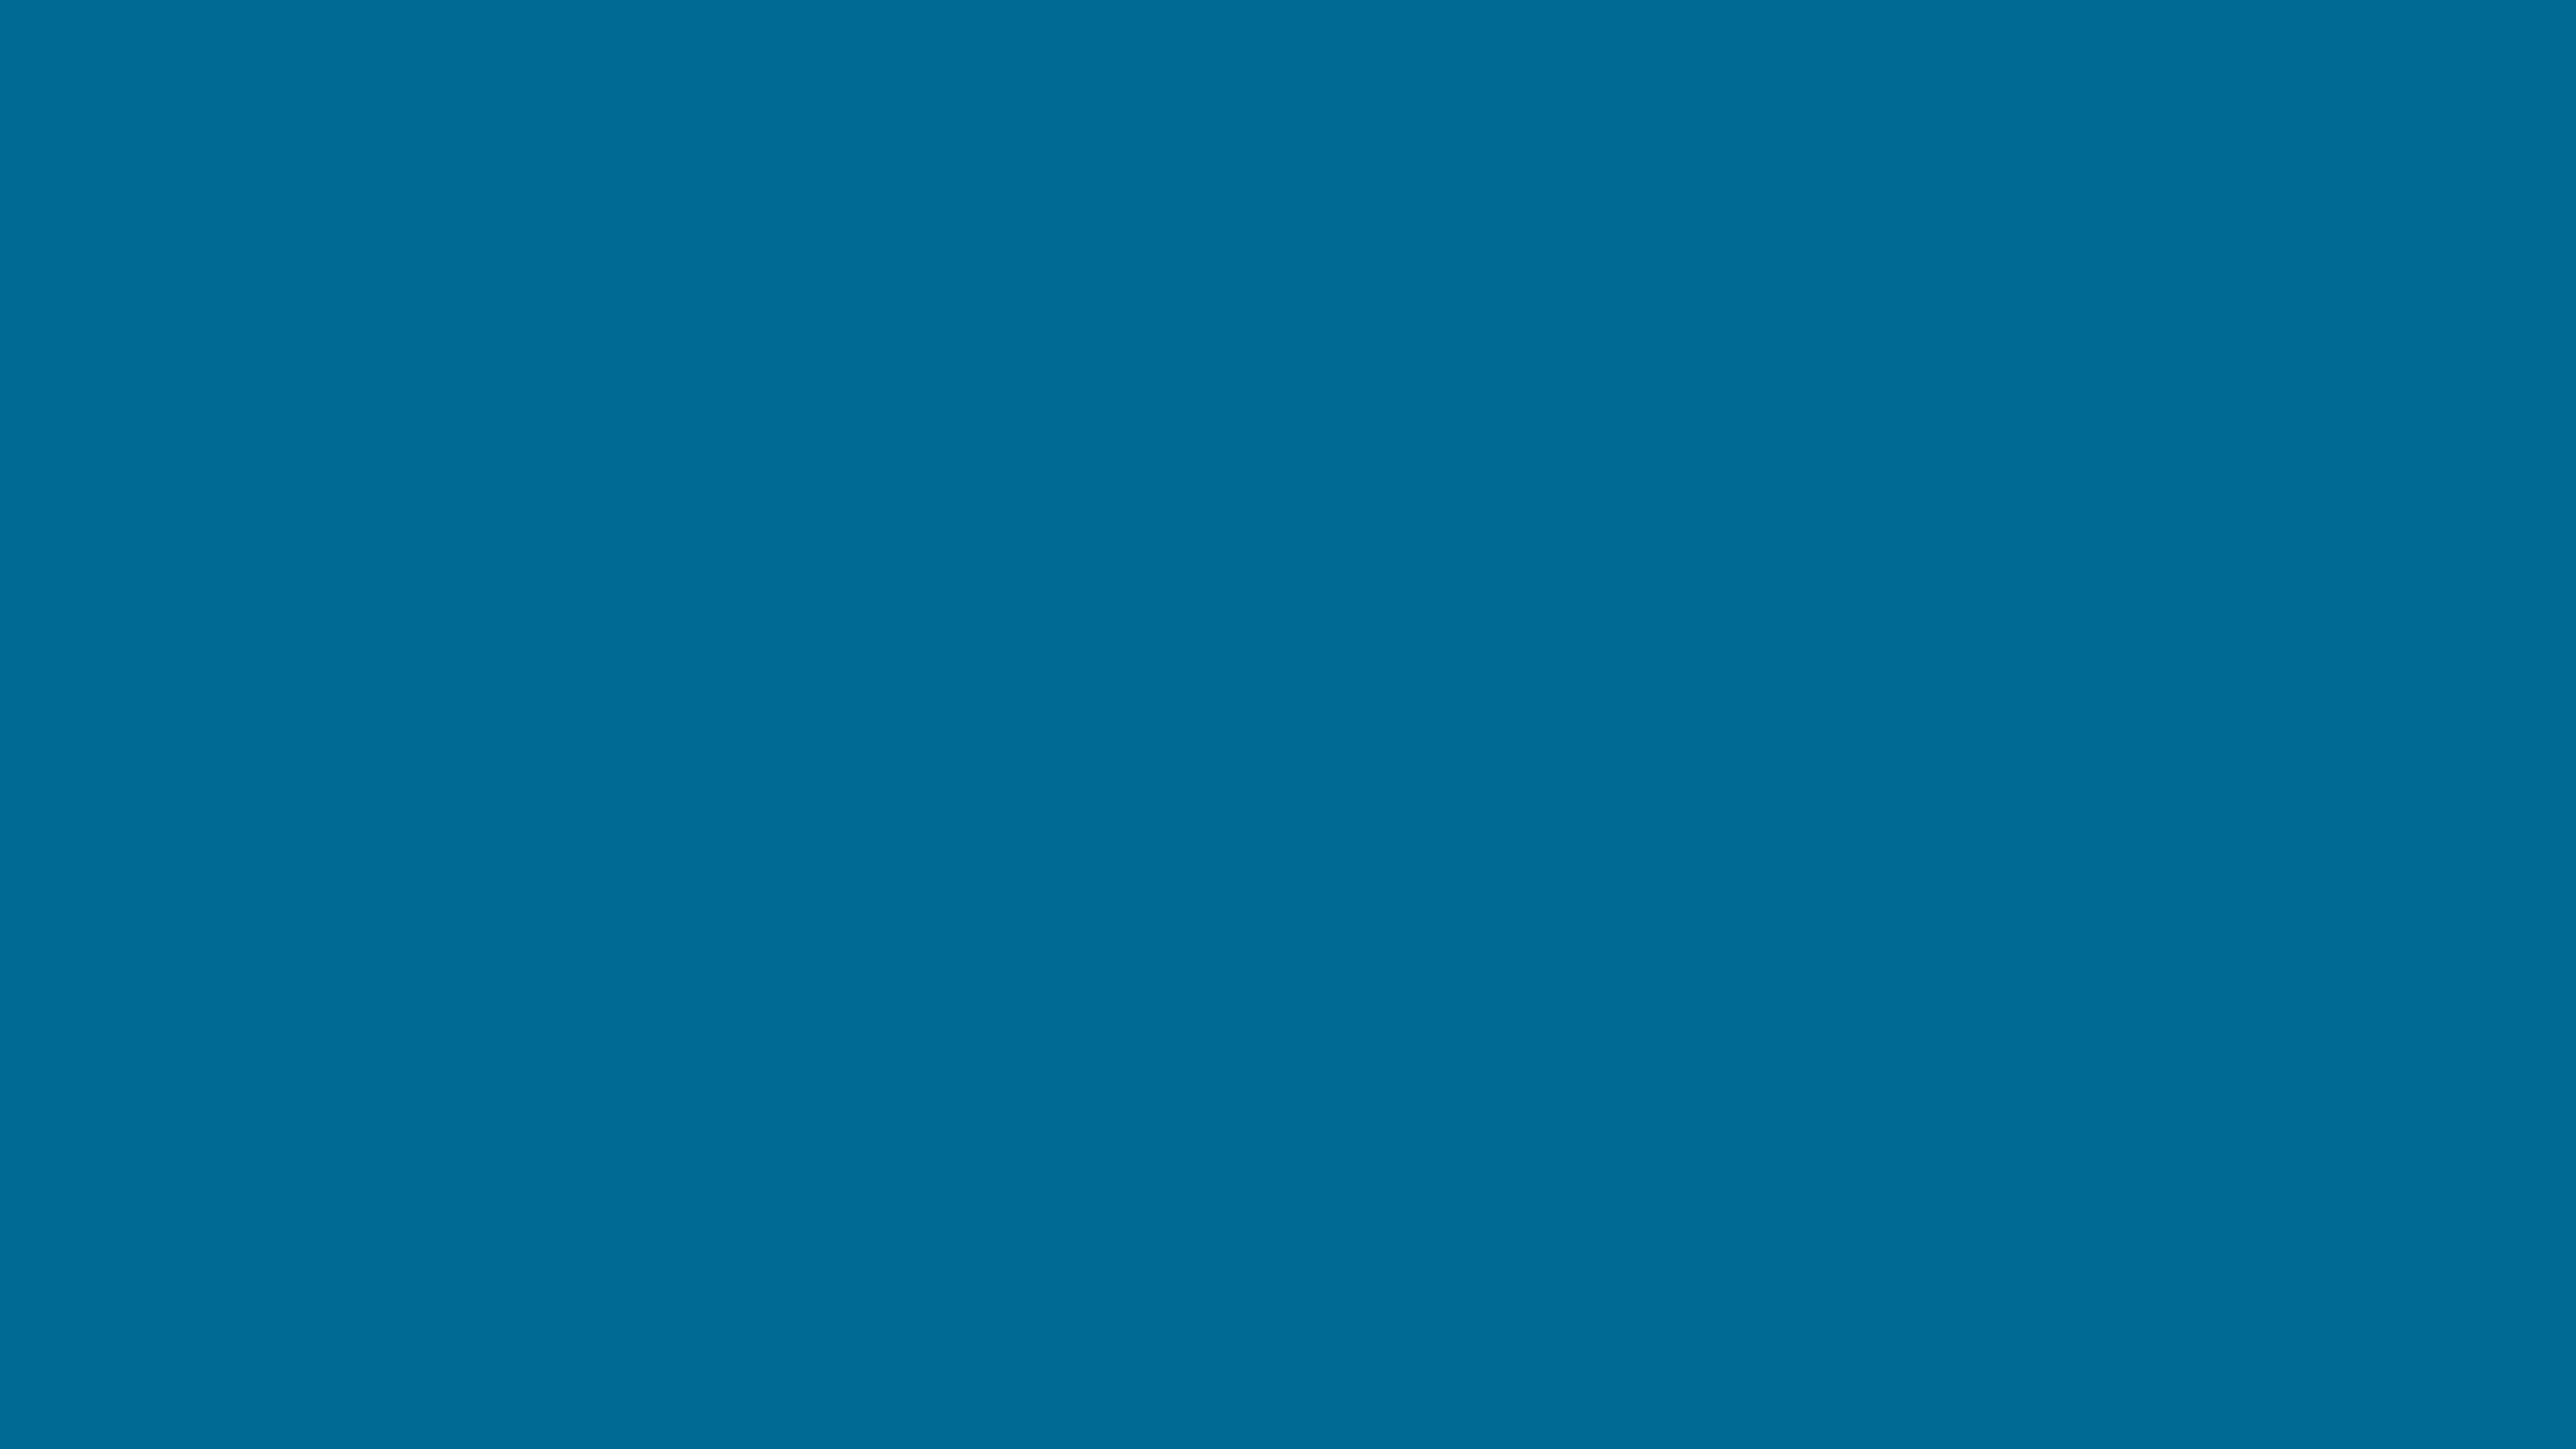 5120x2880 Sea Blue Solid Color Background